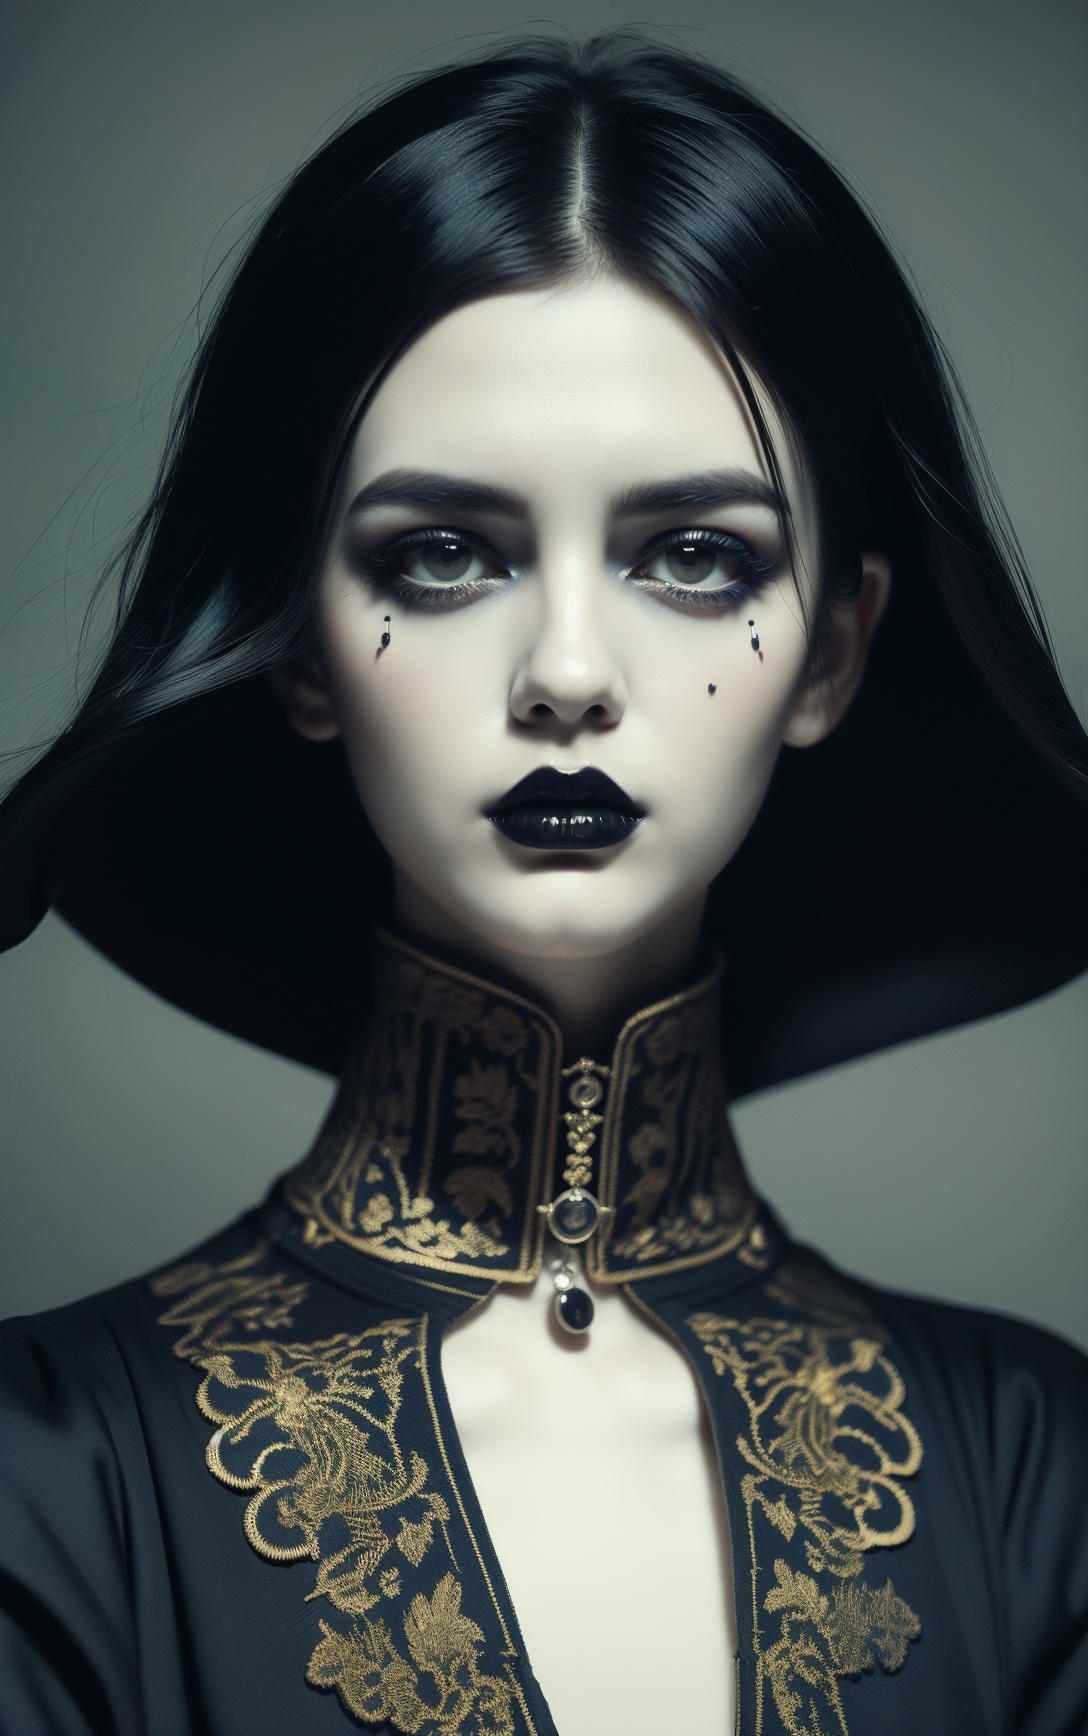 (masterpiece, top quality, best quality, official art, beautiful and aesthetic:1.2),cover art,illustration minimalism,gothic style Resonant Peaceful Navy Blue ([quinoa:Burgers:4]:1.2),it is anthropomorphic with a face,dark,mysterious,haunting,dramatic,ornate,detailed,